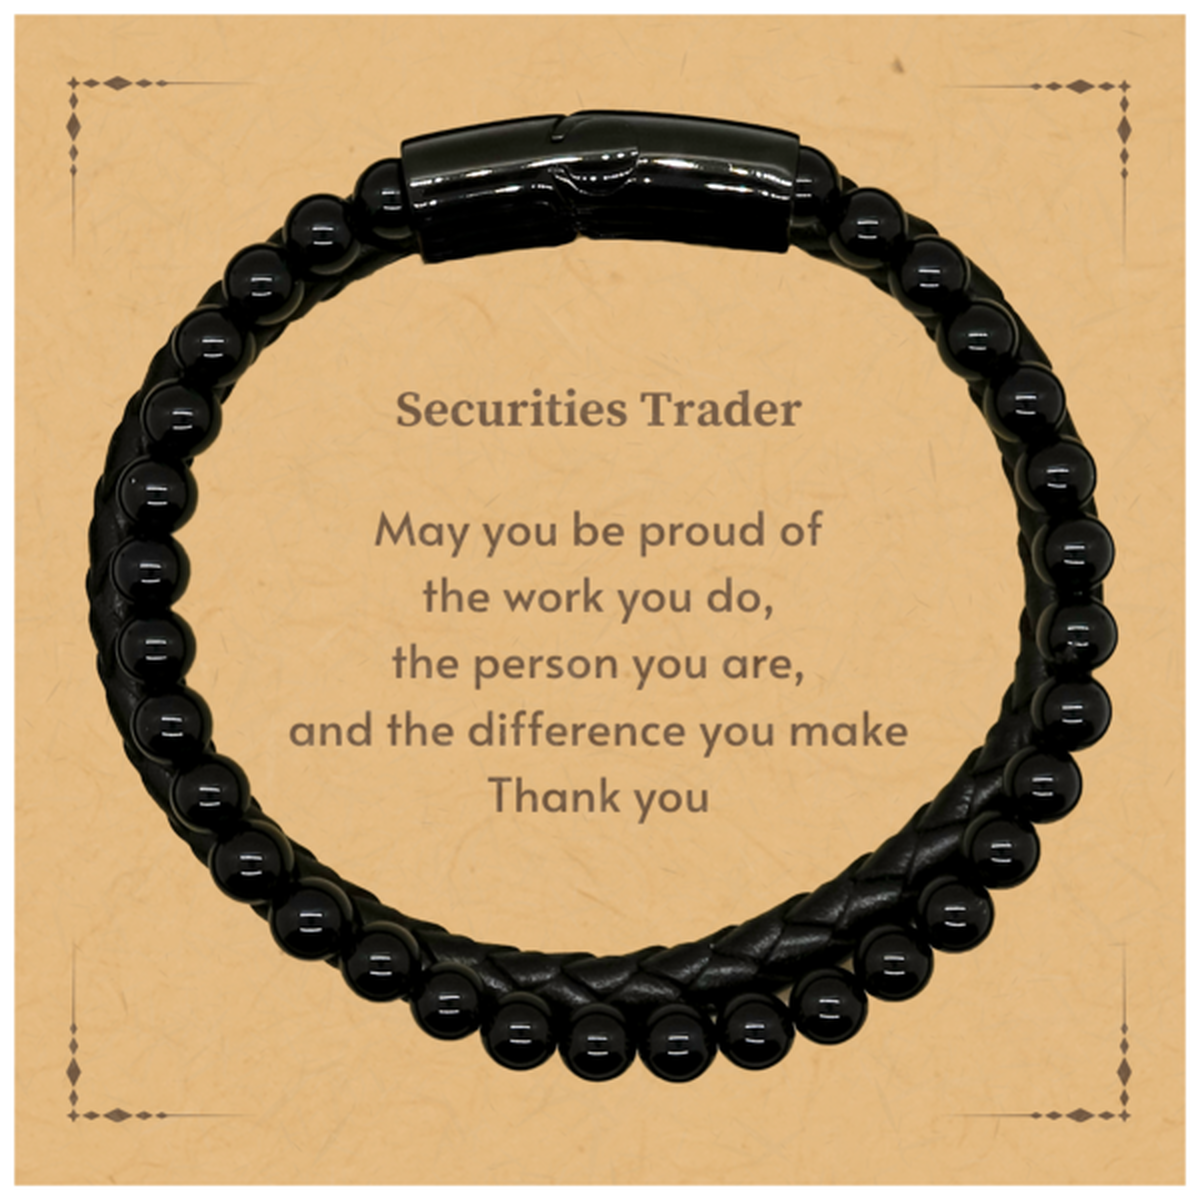 Heartwarming Stone Leather Bracelets Retirement Coworkers Gifts for Securities Trader, Securities Trader May You be proud of the work you do, the person you are Gifts for Boss Men Women Friends